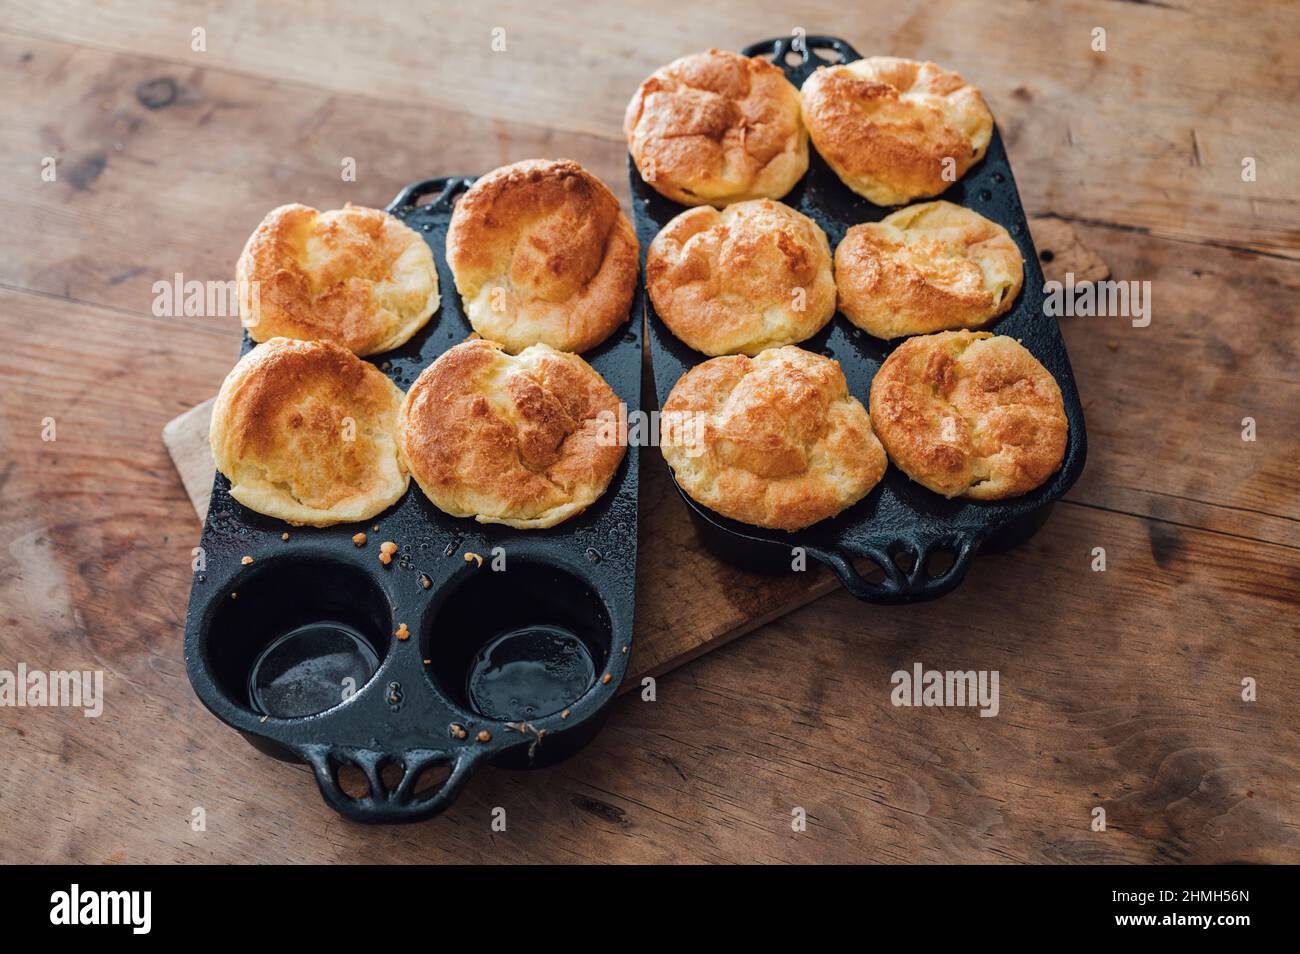 Homemade] Yorkshire pudding in new cast iron pan : r/food